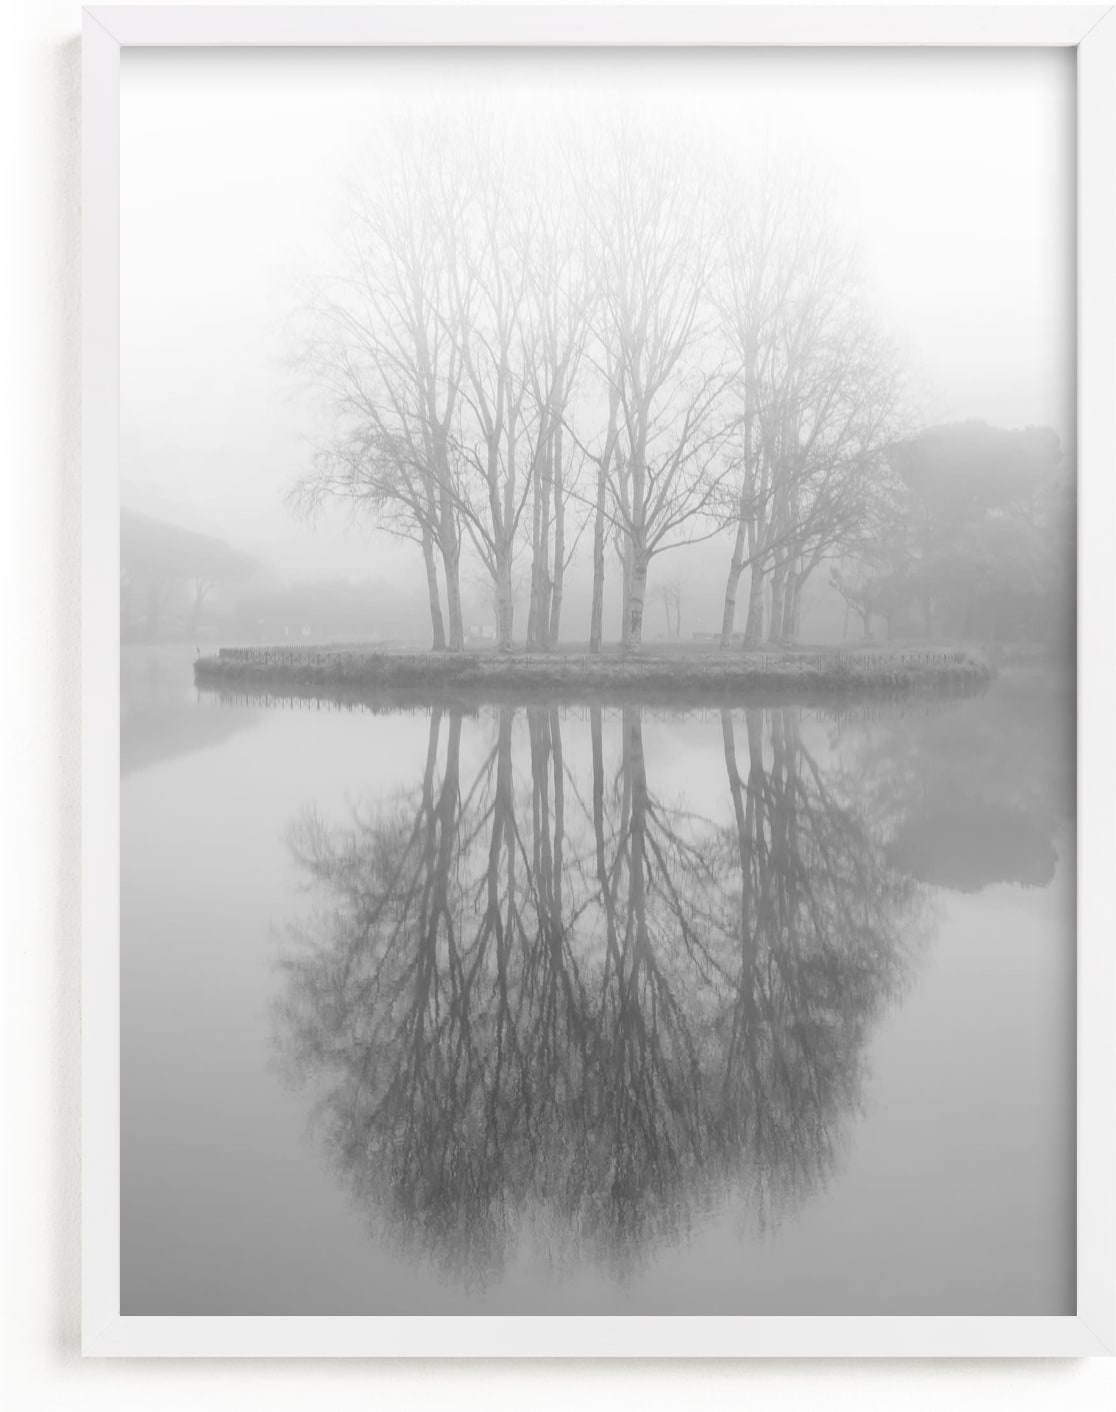 This is a black and white art by Massimiliano Massimo Borelli called Real Reflections.